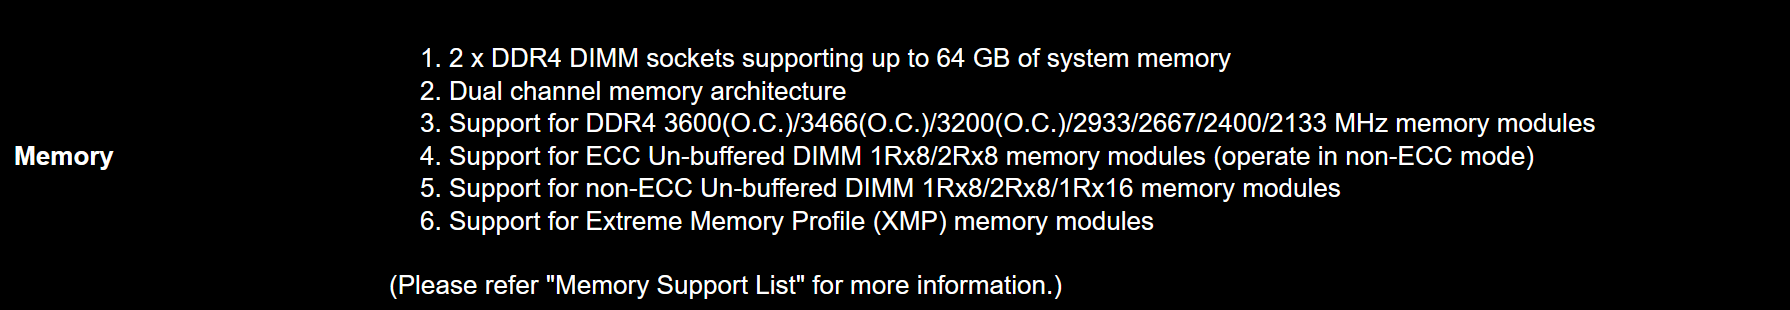 Gigabyte motherboard memory specifications